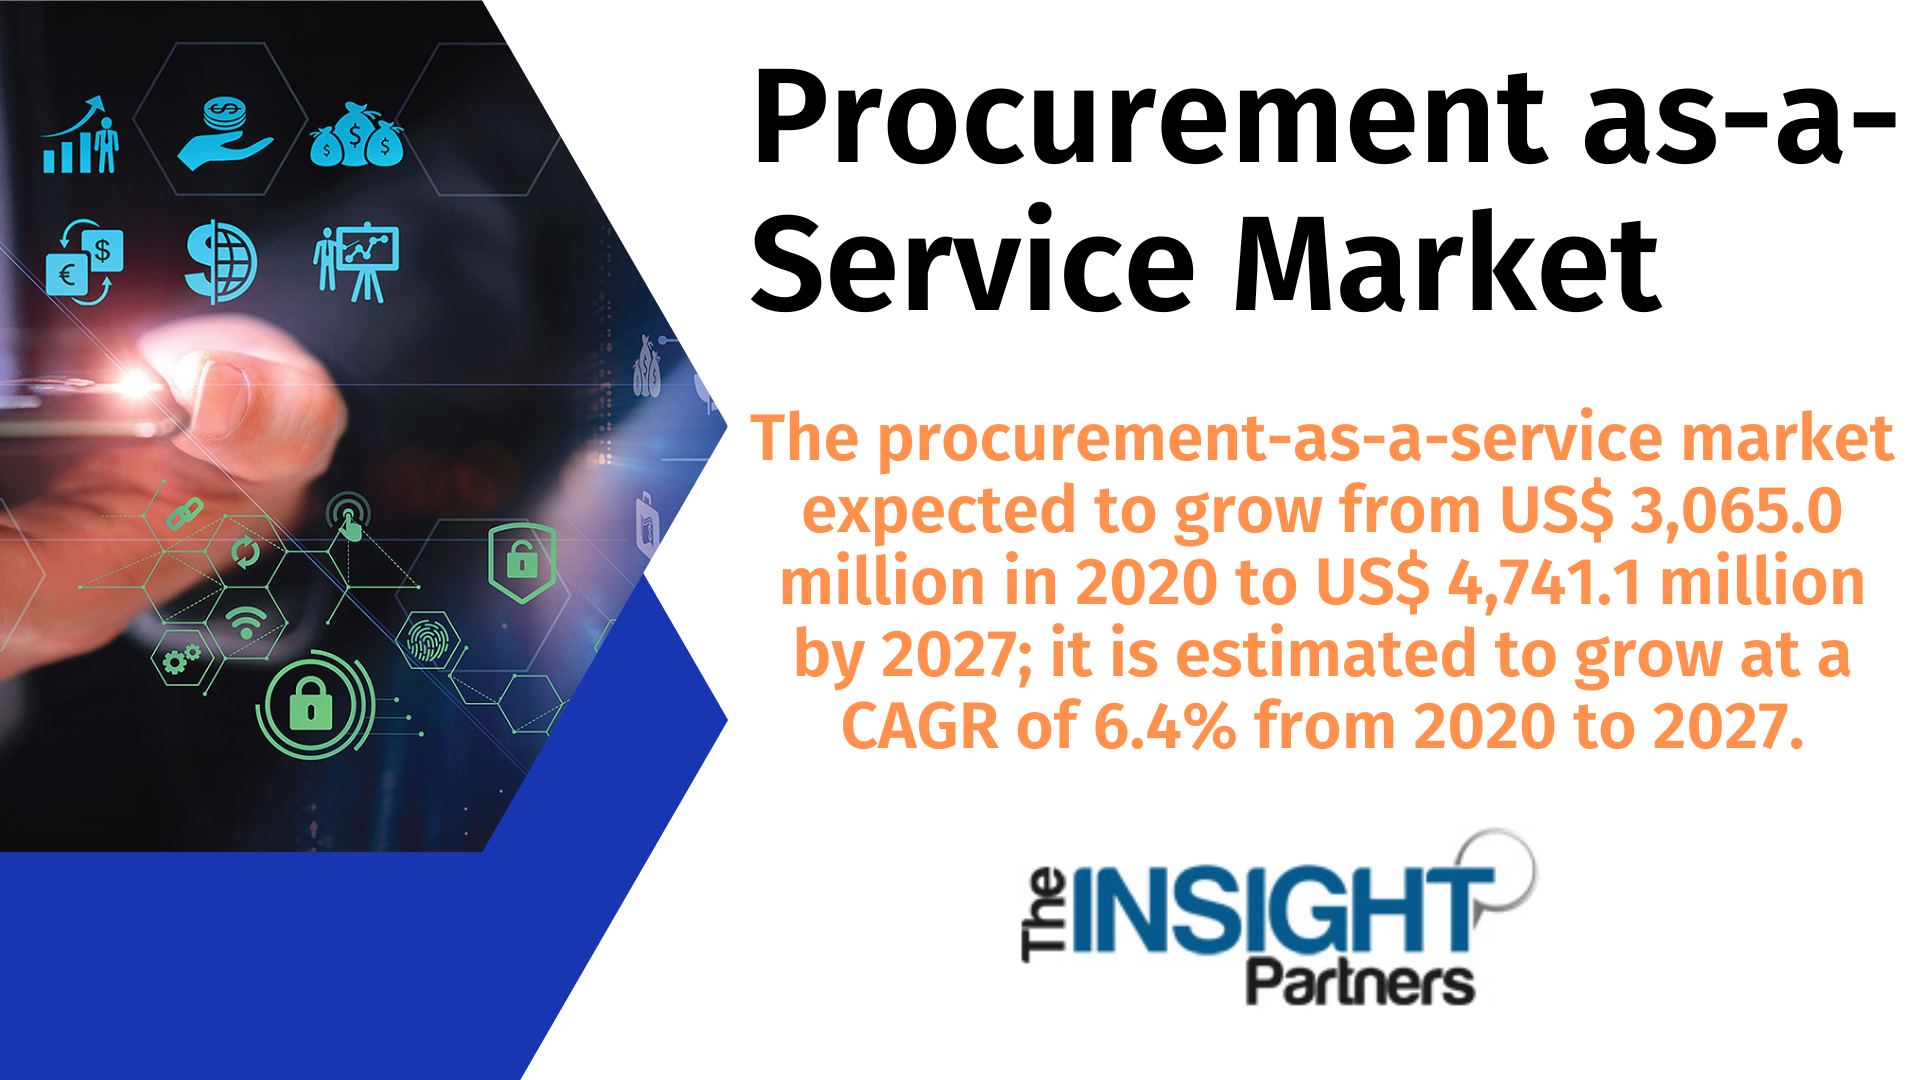 Procurement as-a-Service Market 2027 Growth Opportunities, Top Key Players, Industry Outlook and Forecasts